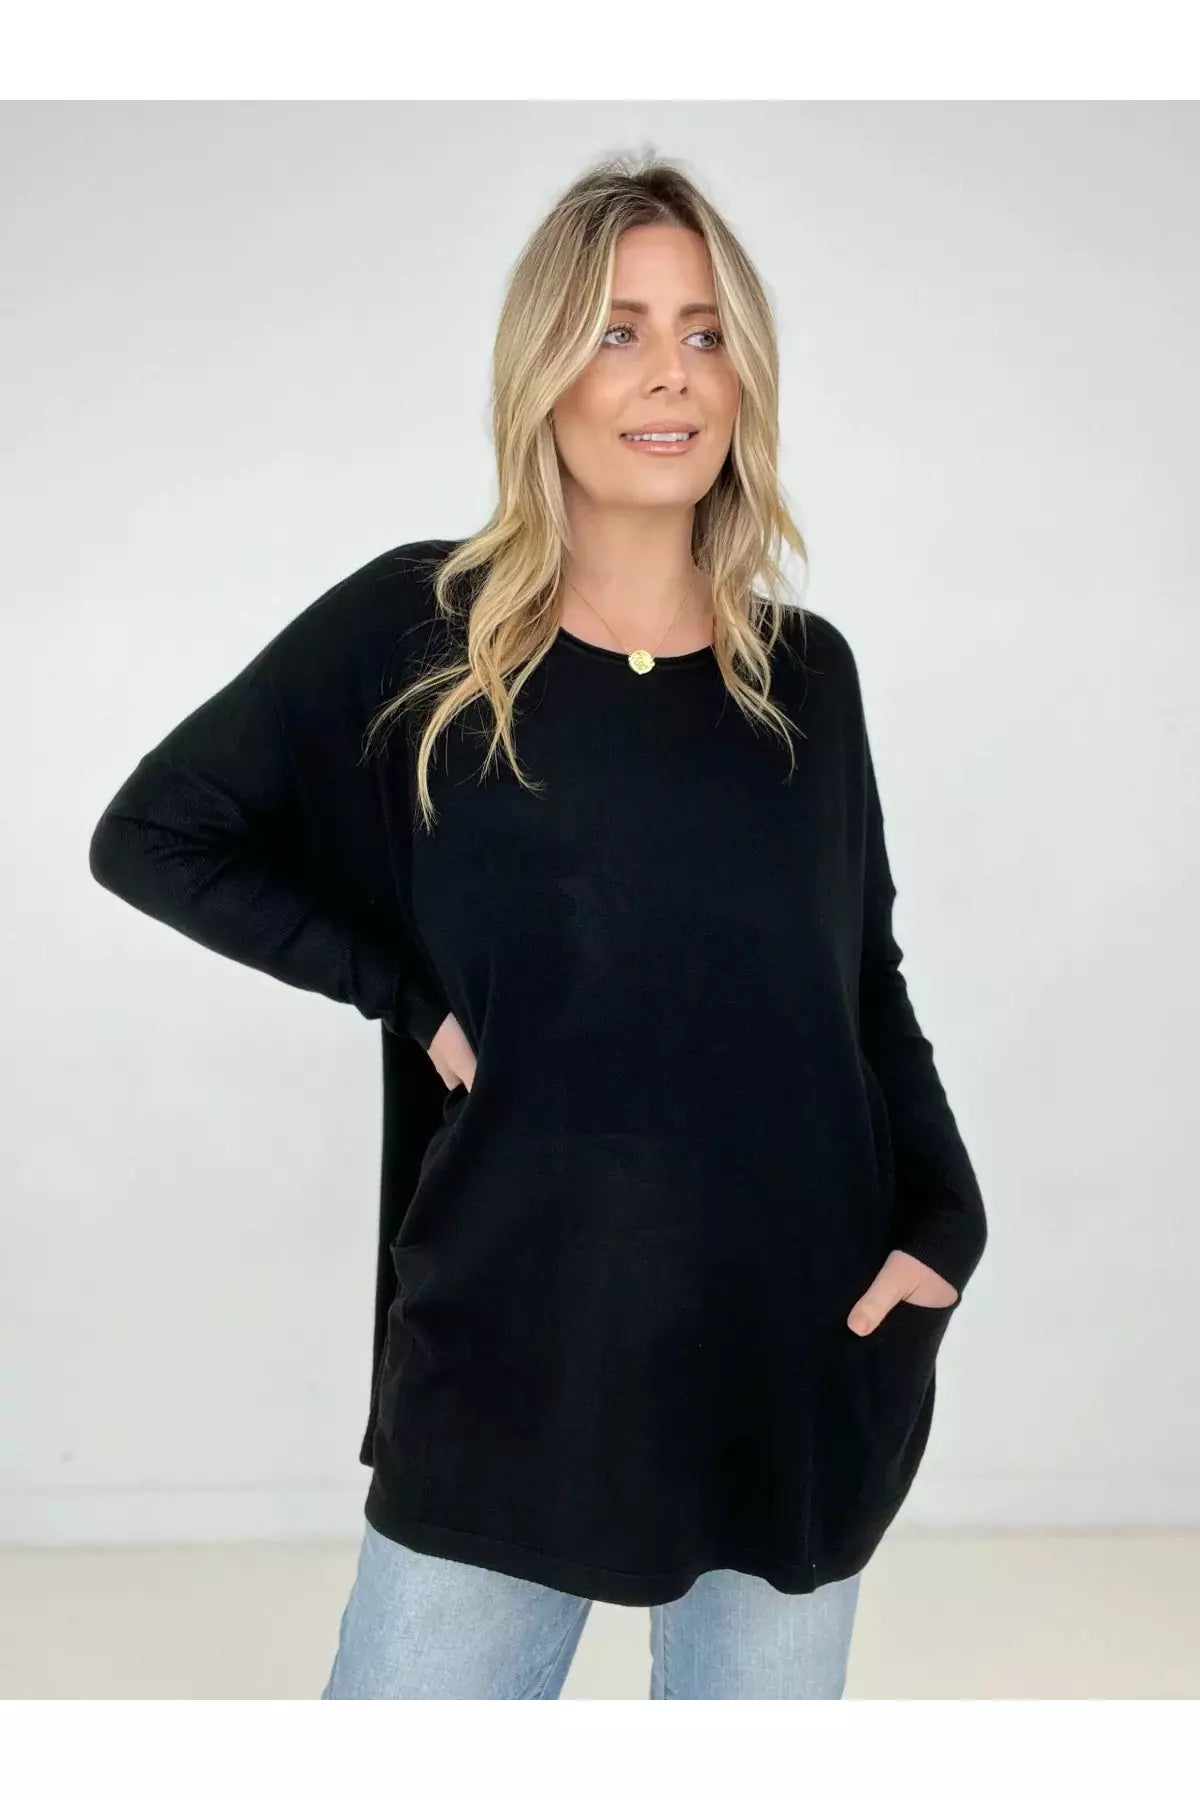 Zenana "Claire" Solid Oversized Front Pocket Sweater